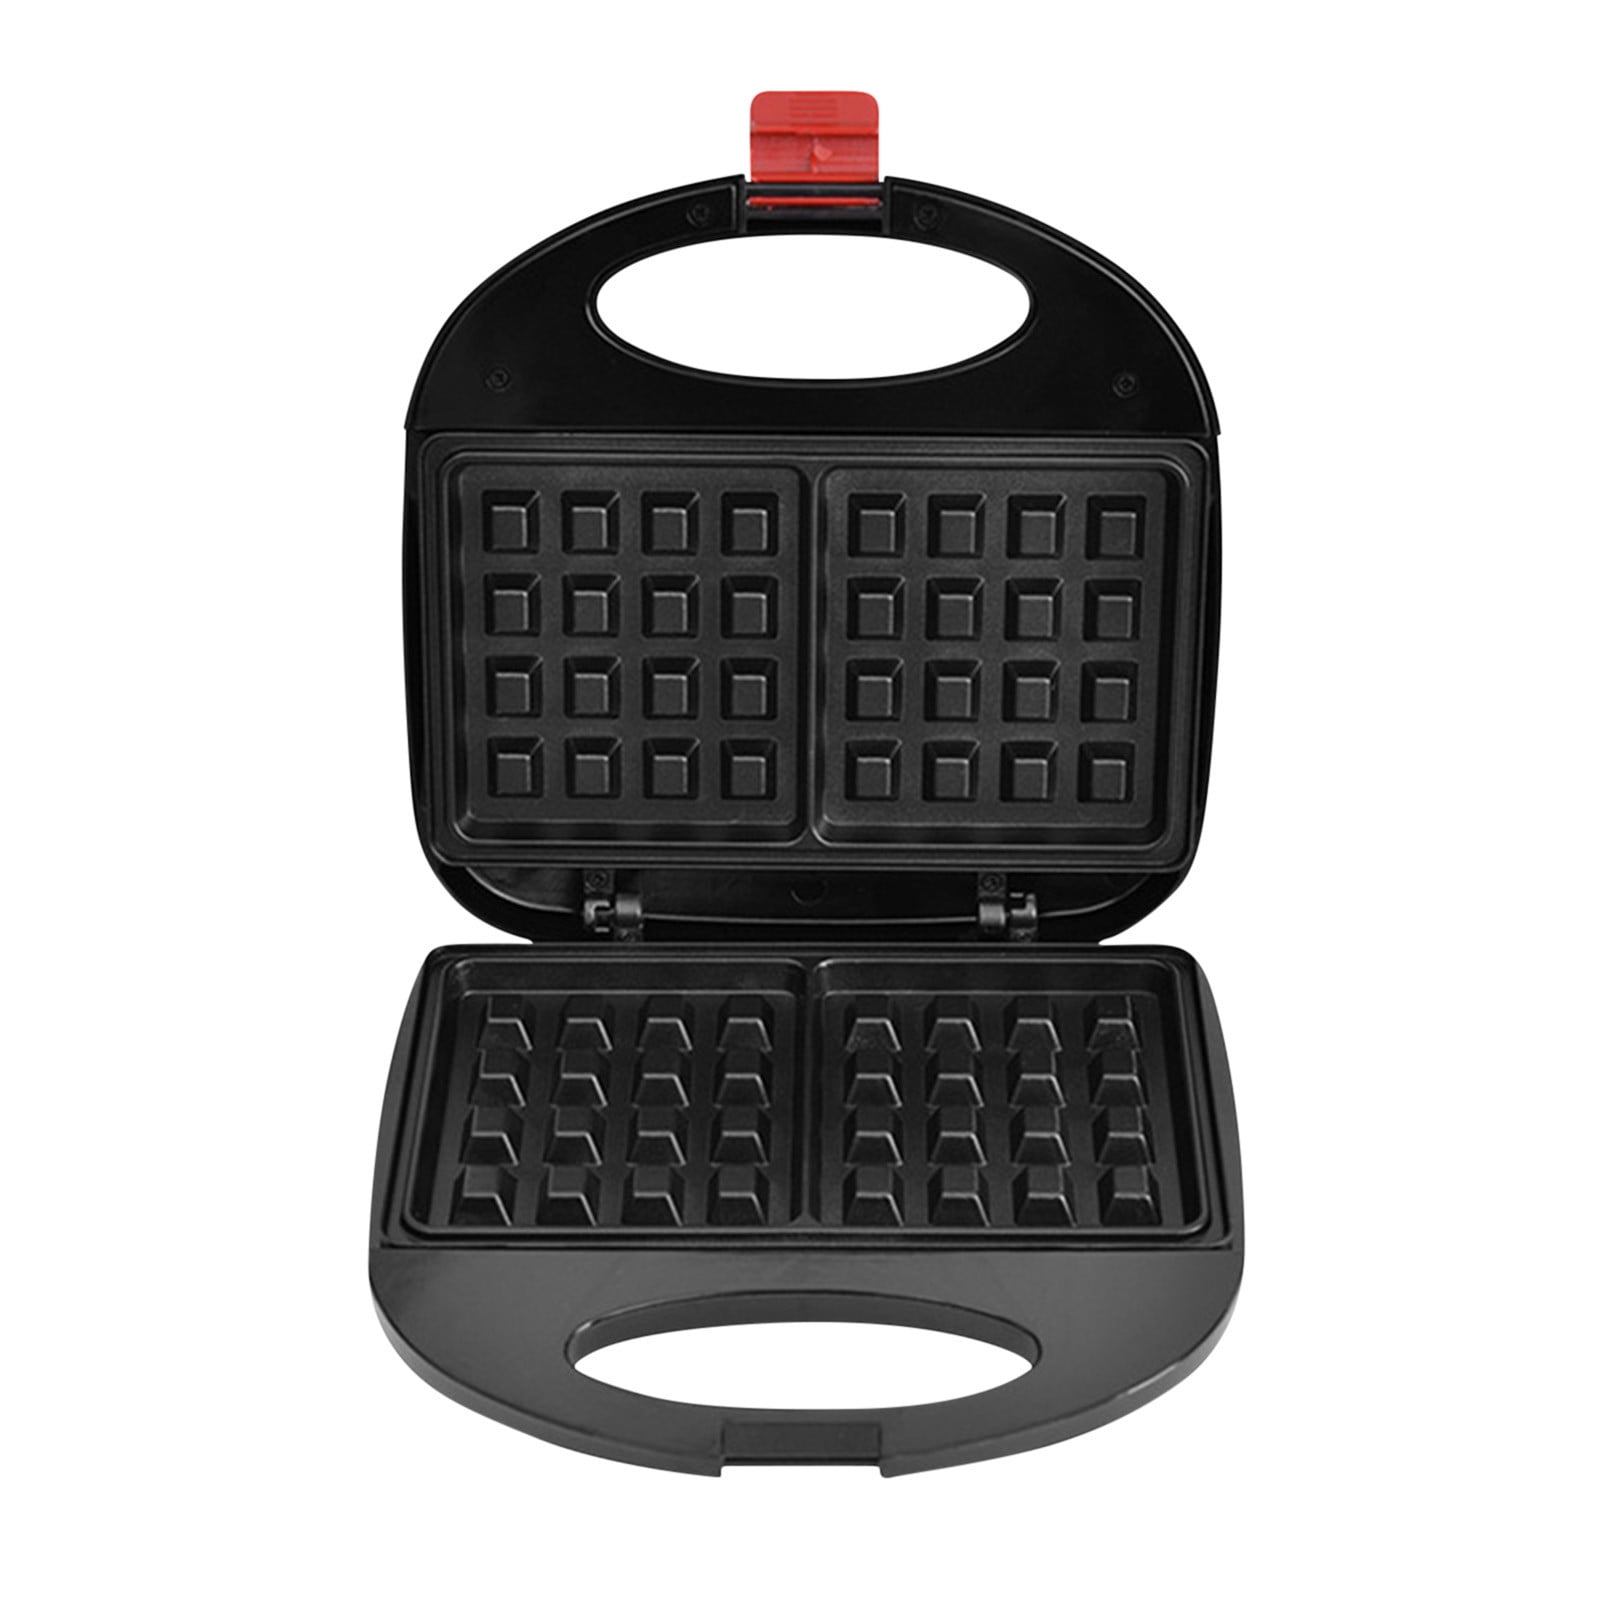  Sandwich Maker, Waffle Maker, multifun 2-in-1 Removable  Non-Stick Plates,Food Grade Premium Stainless Steel, LED Indicator  Lights,Cool Touch Handle, Suitable for Breakfast, Lunch, Snacks, 750W: Home  & Kitchen